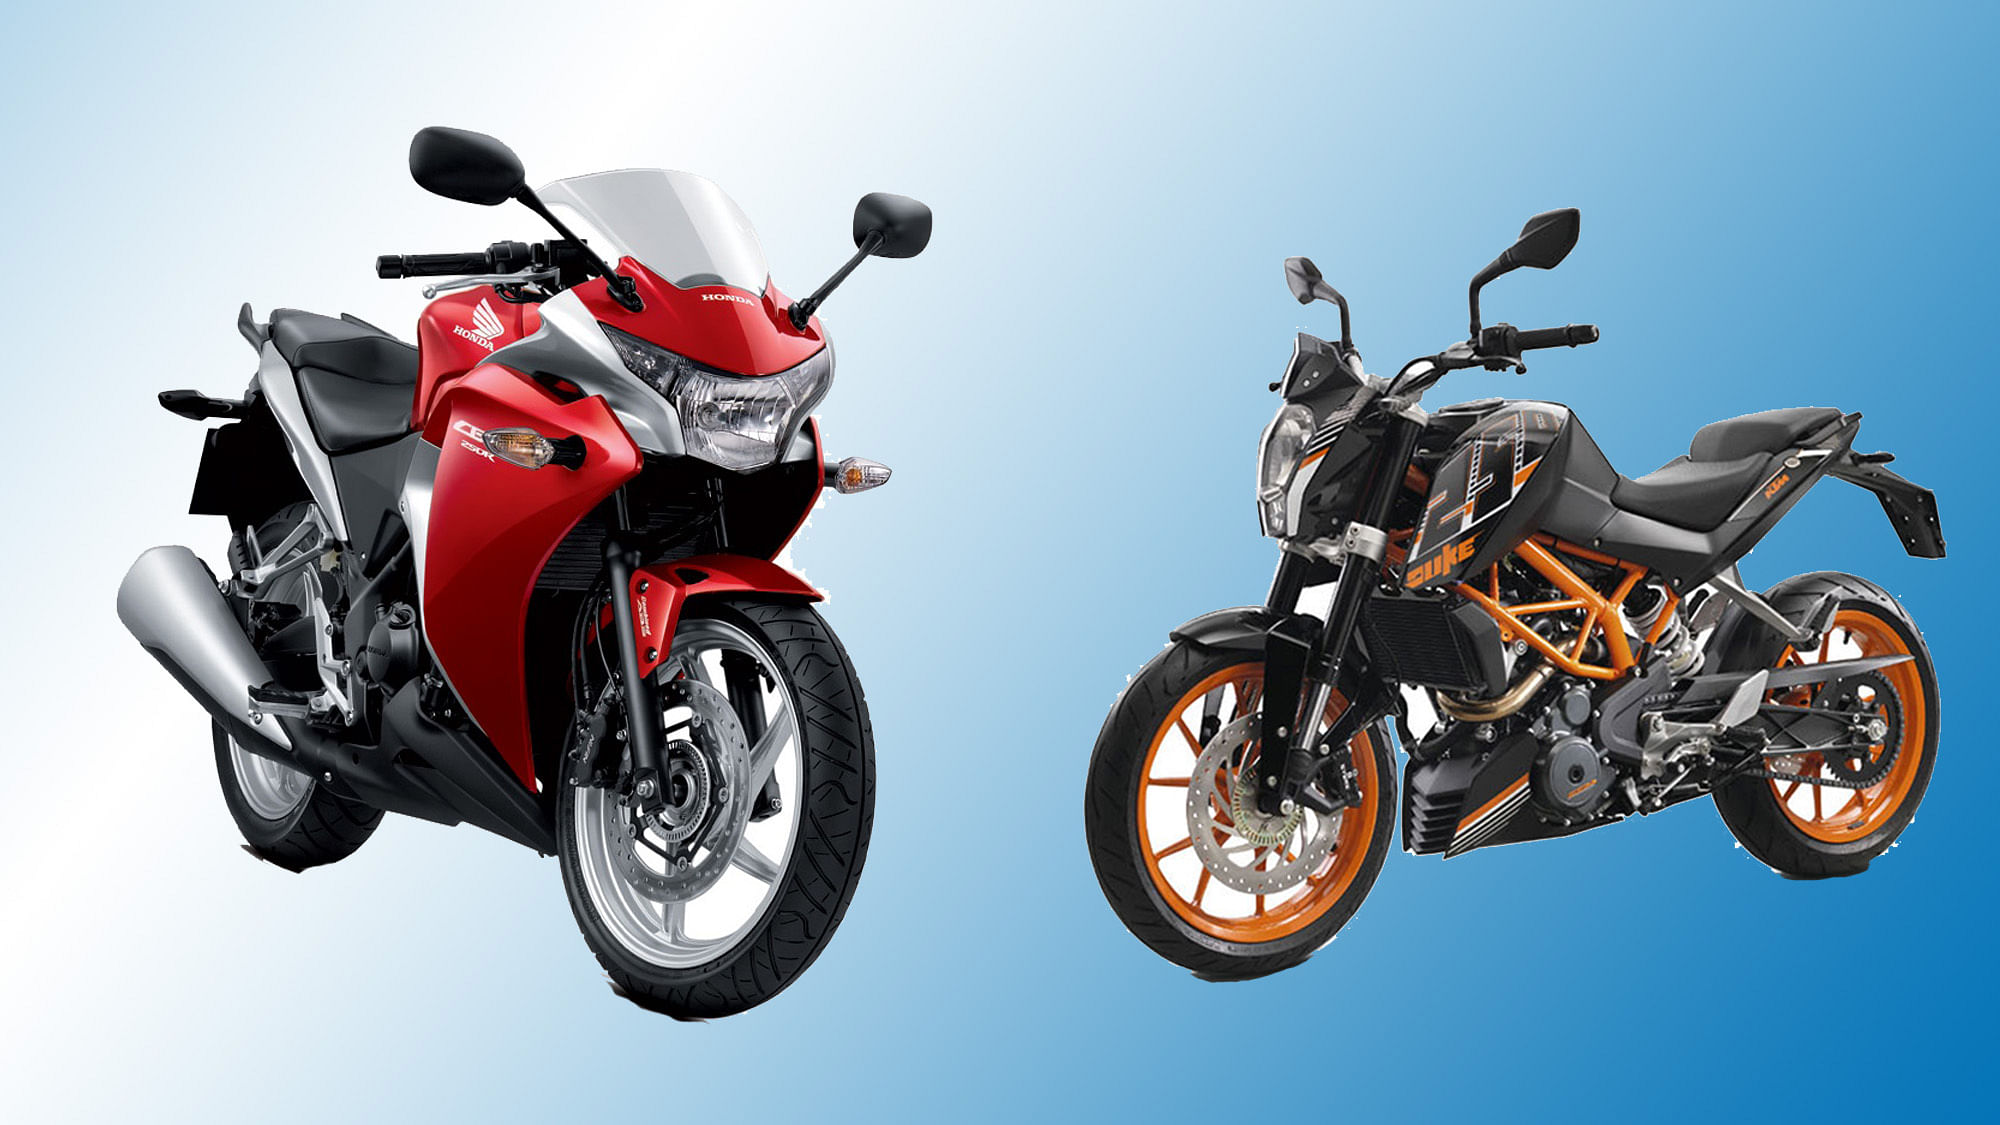 Honda CBR250R (left) or the KTM Duke 250 (right). Which one would you pick?&nbsp;